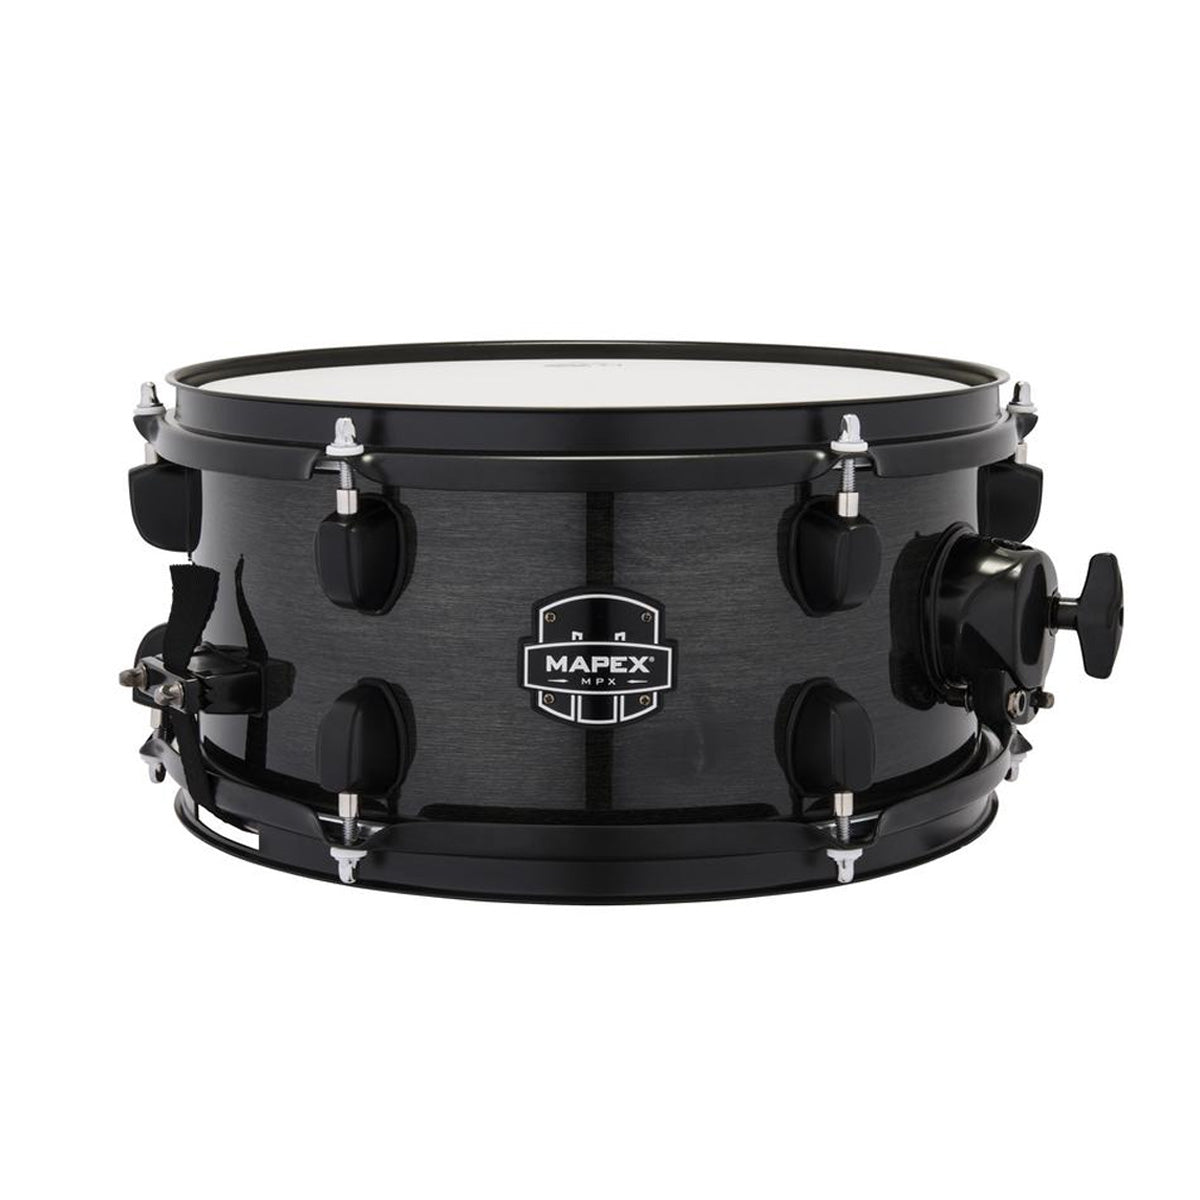 Mapex MPX 12"x6" Hybrid Shell Snare Drum in Black